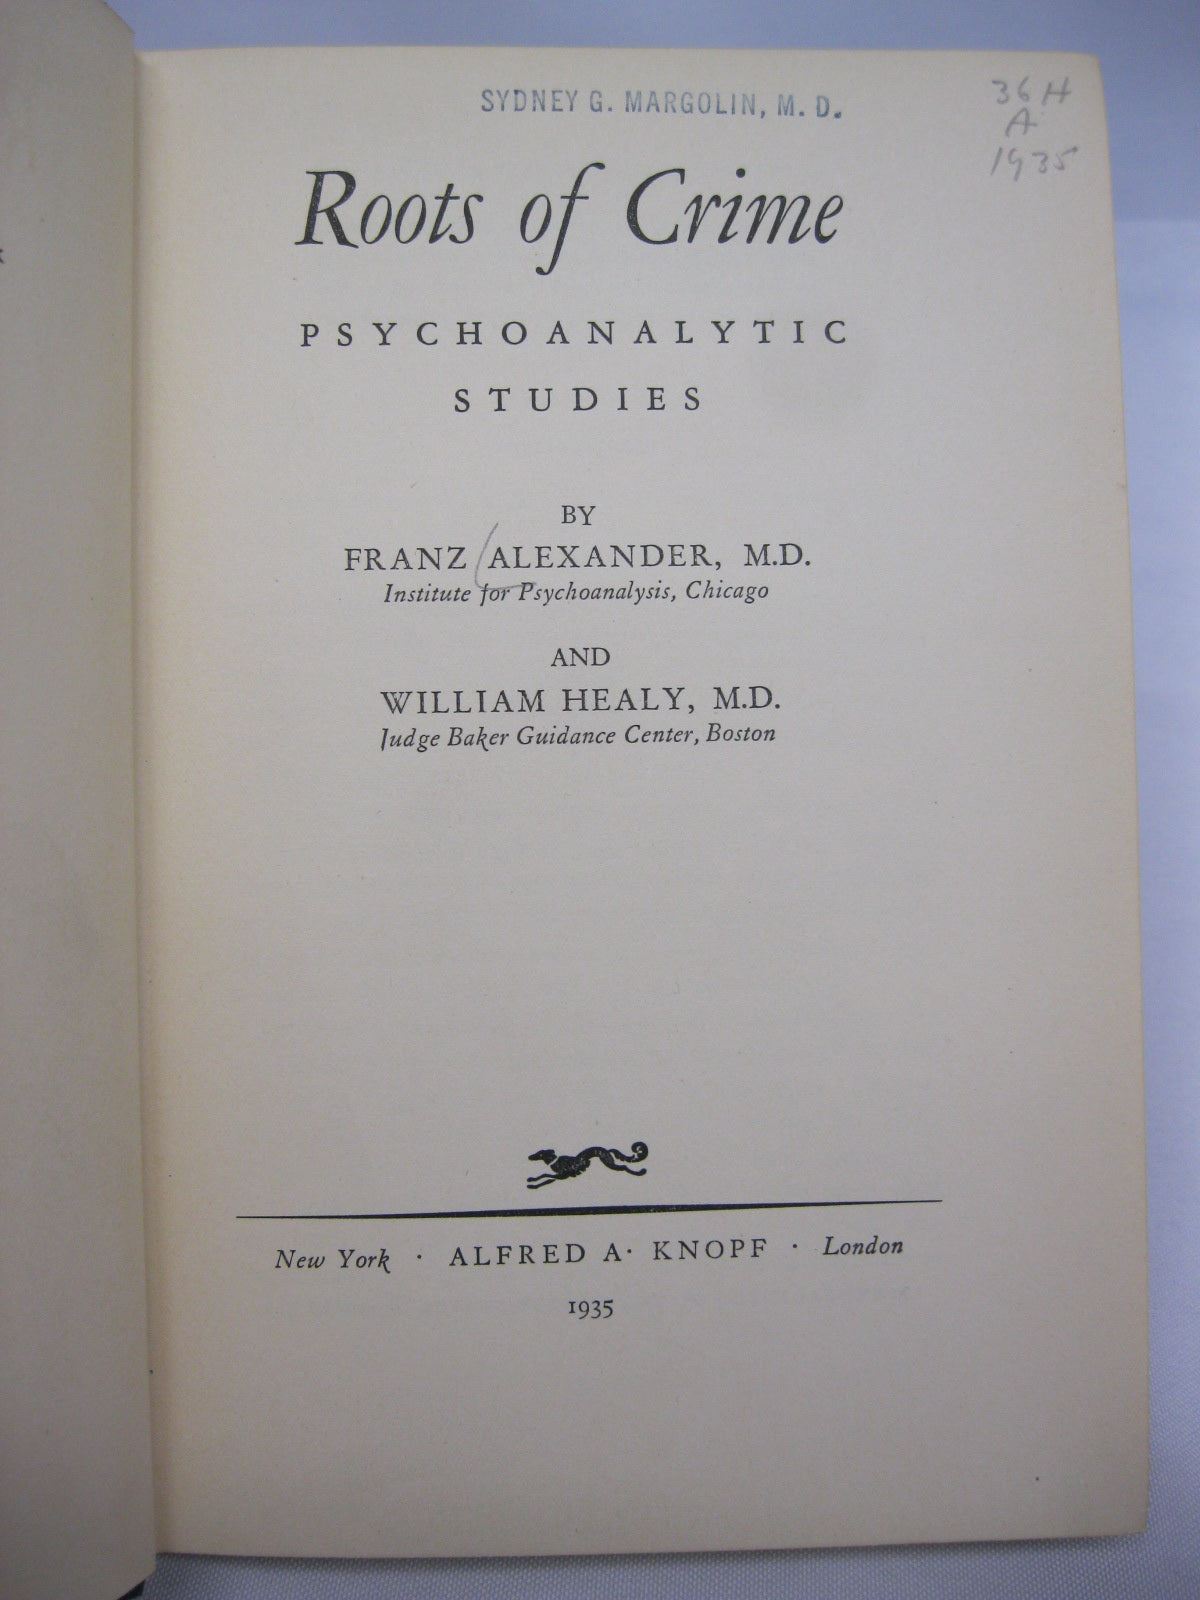 Roots of Crime: Psychoanalytic Studies by Franz Alexander